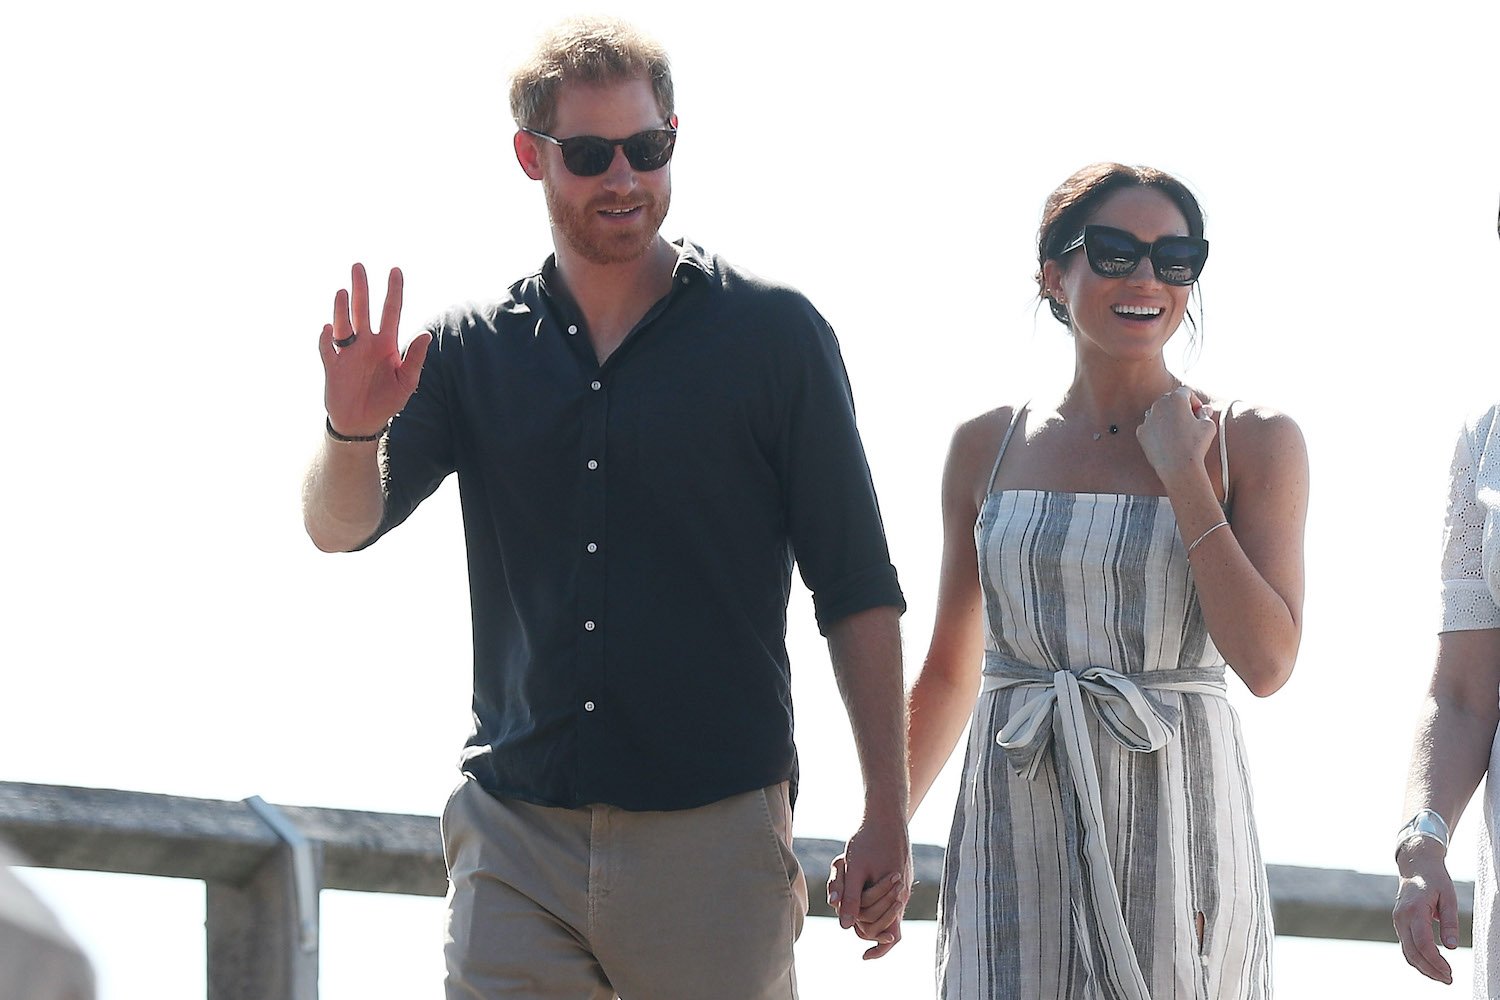 Prince Harry and Meghan Markle during tour visiting cities in Australia, Fiji, Tonga and New Zealand